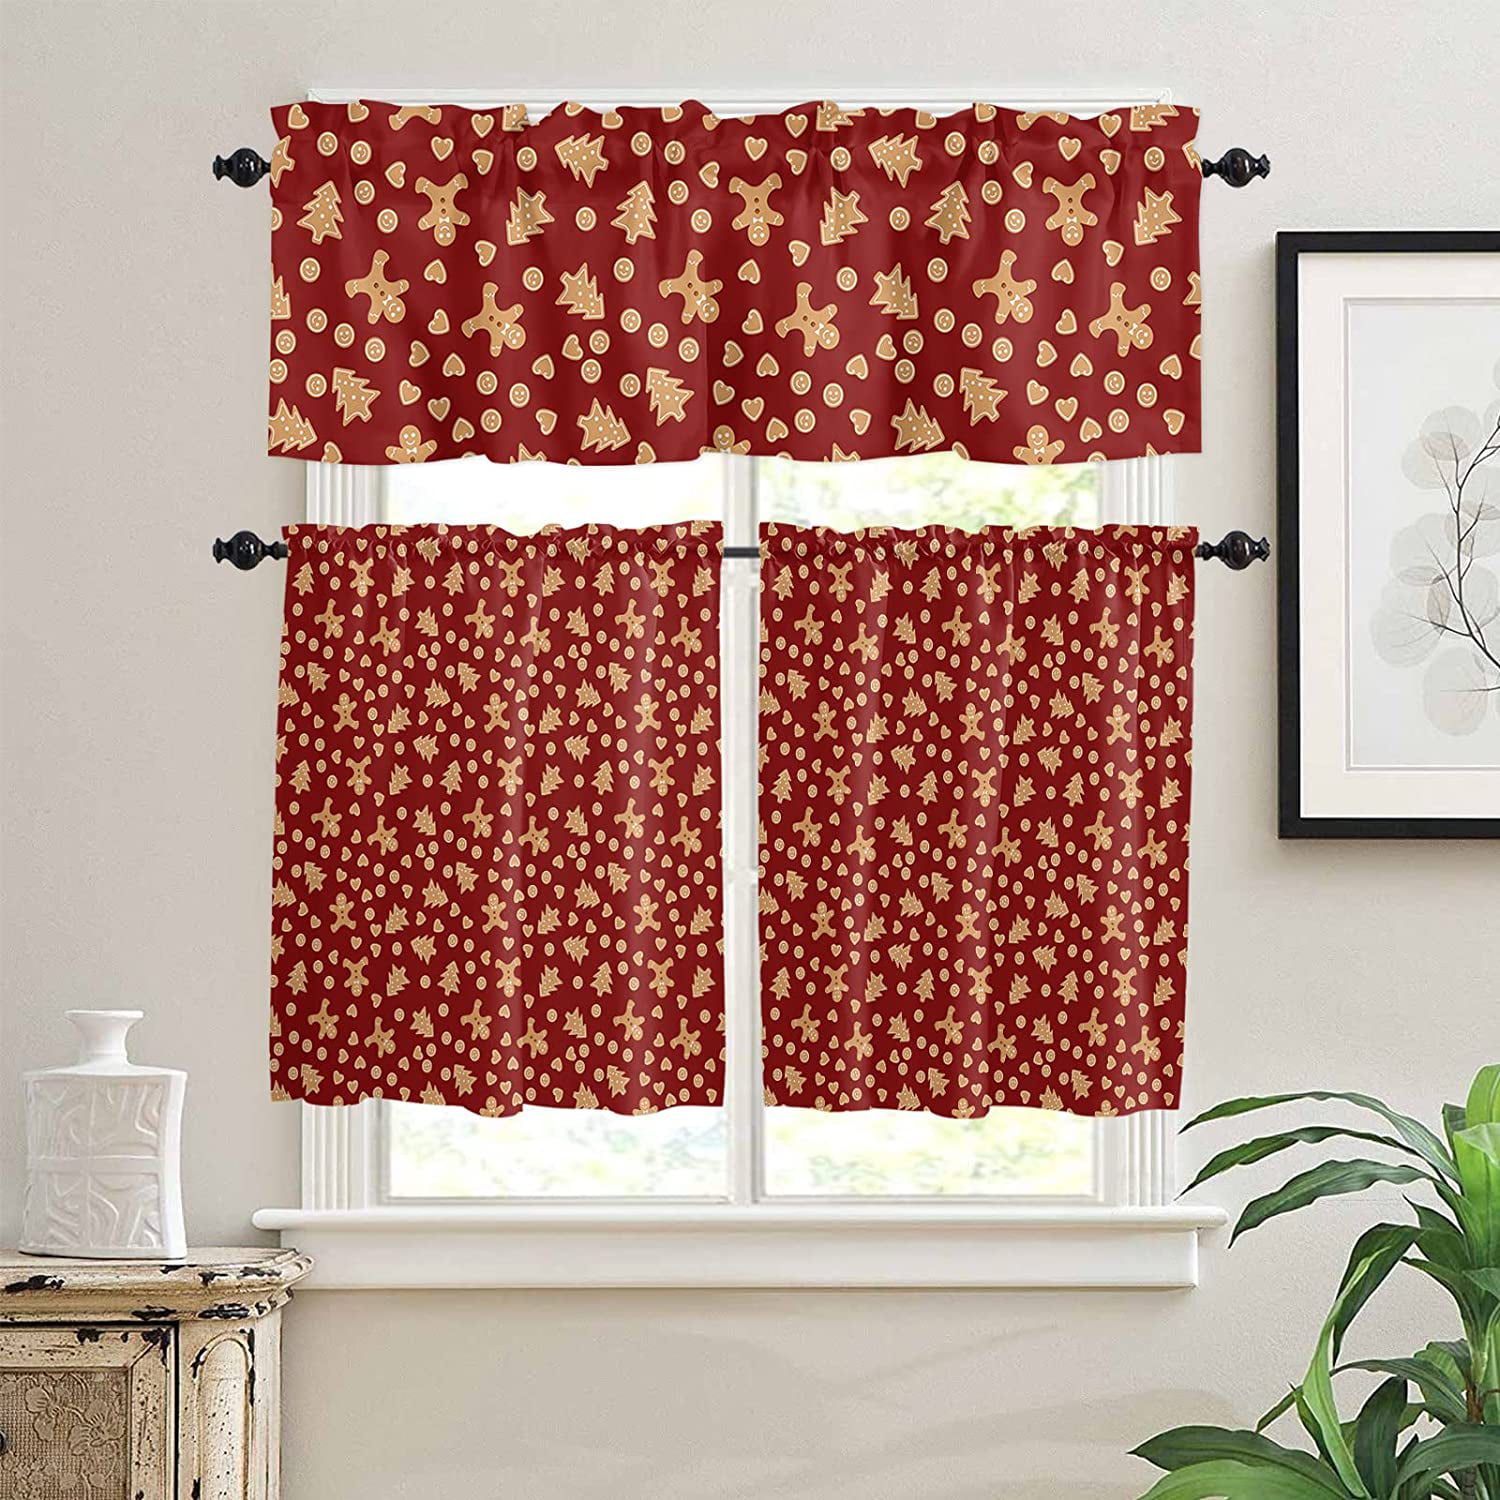  Valances for Windows Christmas Home on on Red Black Buffalo  Plaid Kitchen Curtains 27.5x24 Kitchen Decor Short Curtains, Blackout  Curtain Rods Pocket Small Window Curtains for Bedroom Bathroom : Home 